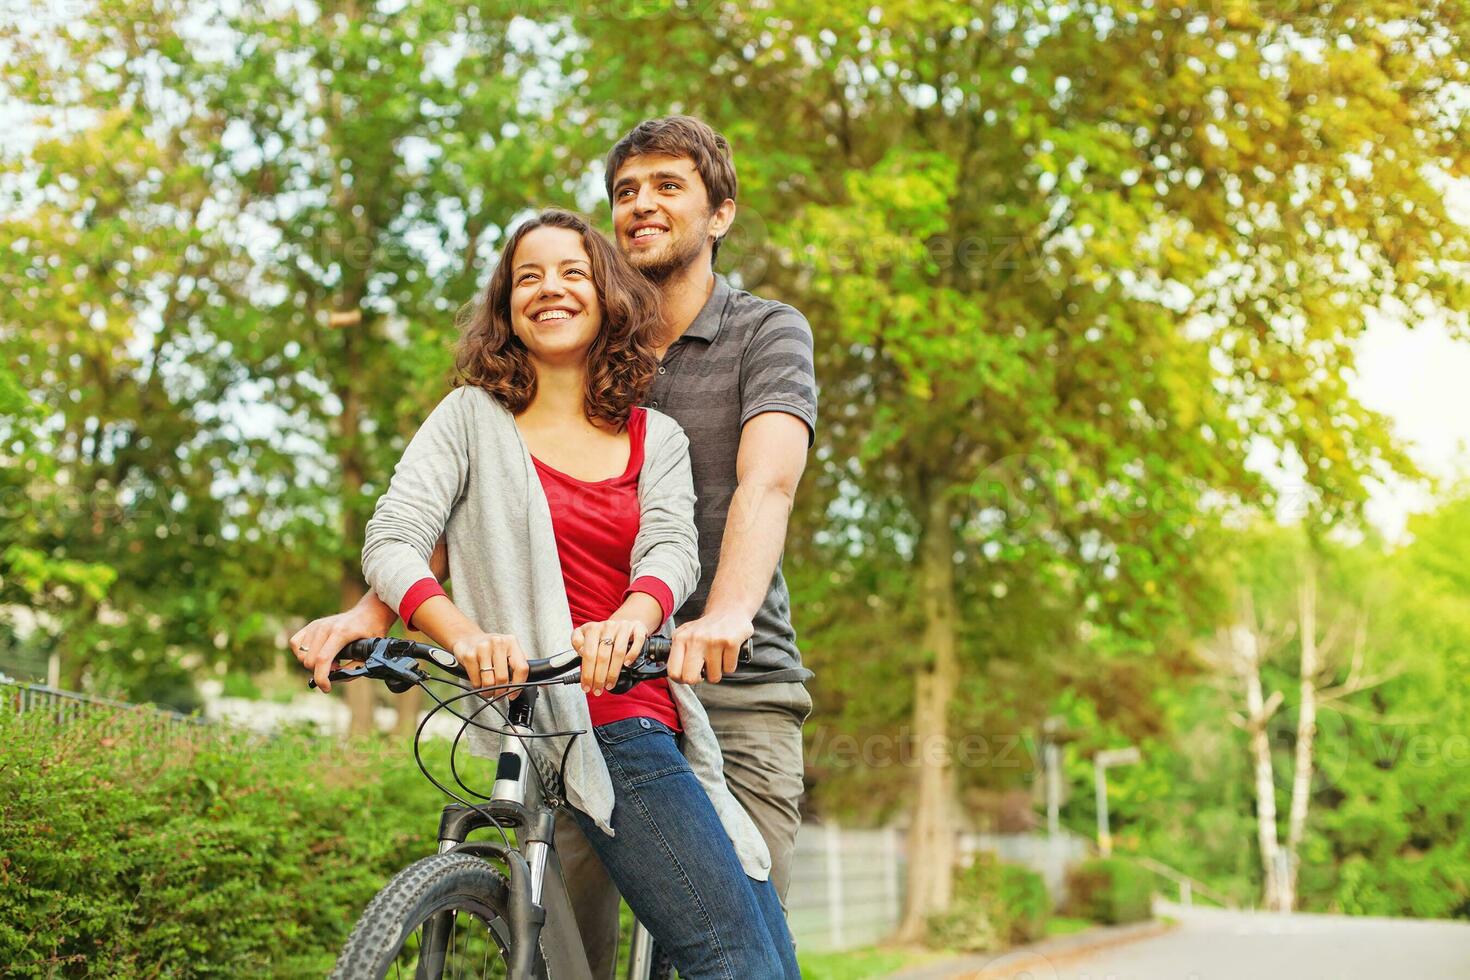 people in love - riding together on the same bicycle photo